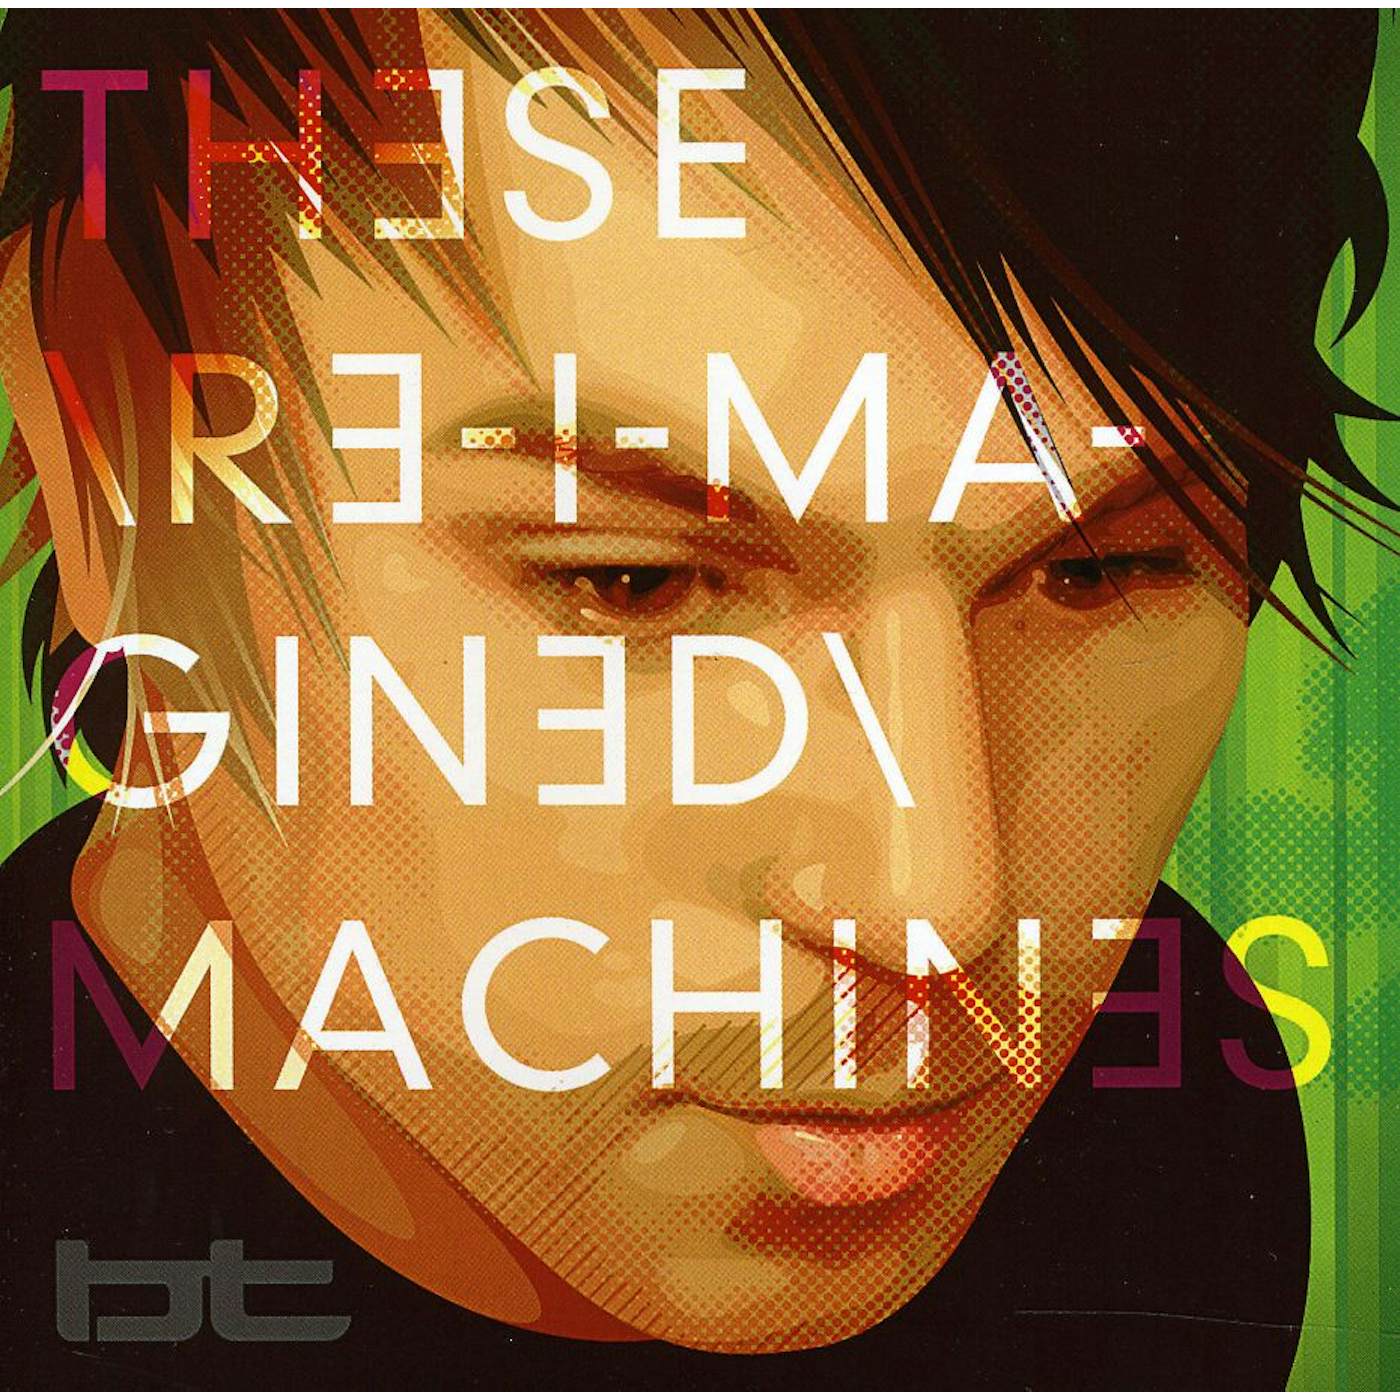 BT THESE RE-IMAGINED MACHINES CD